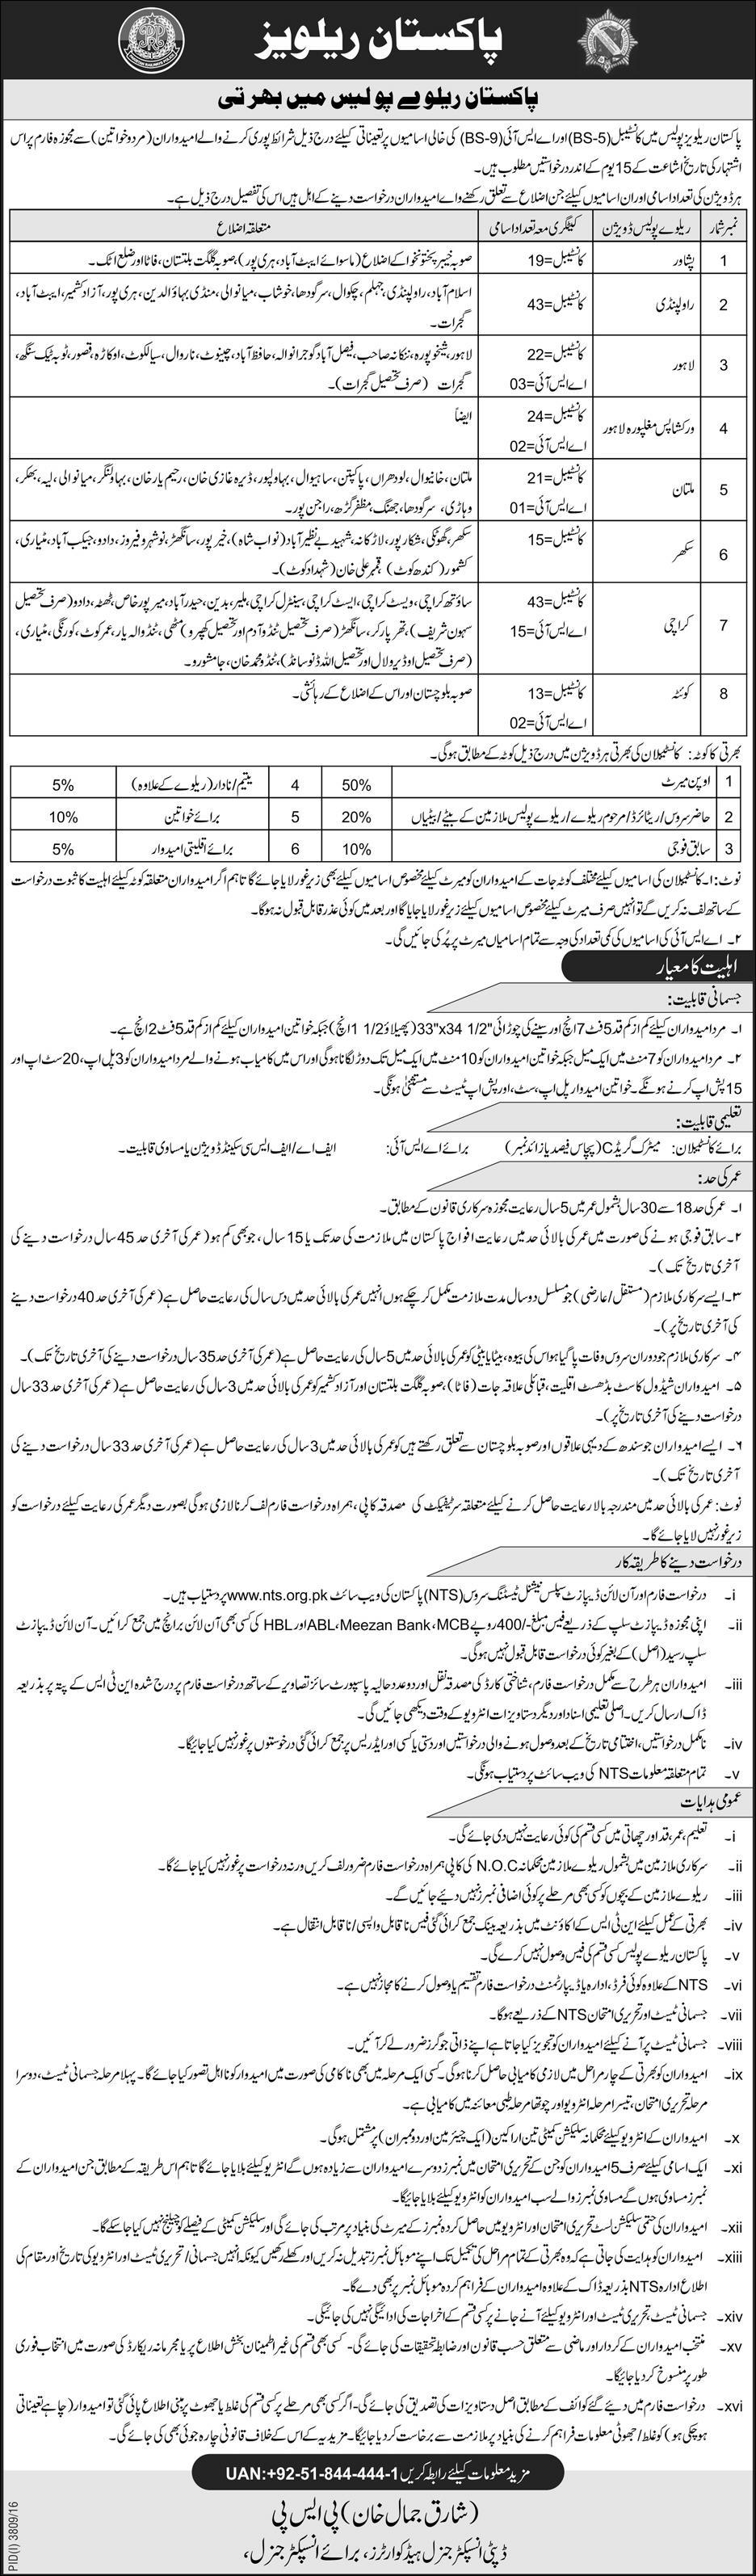 Pakistan Railway Police NTS Jobs 2022 Eligibility, Application Forms and Results